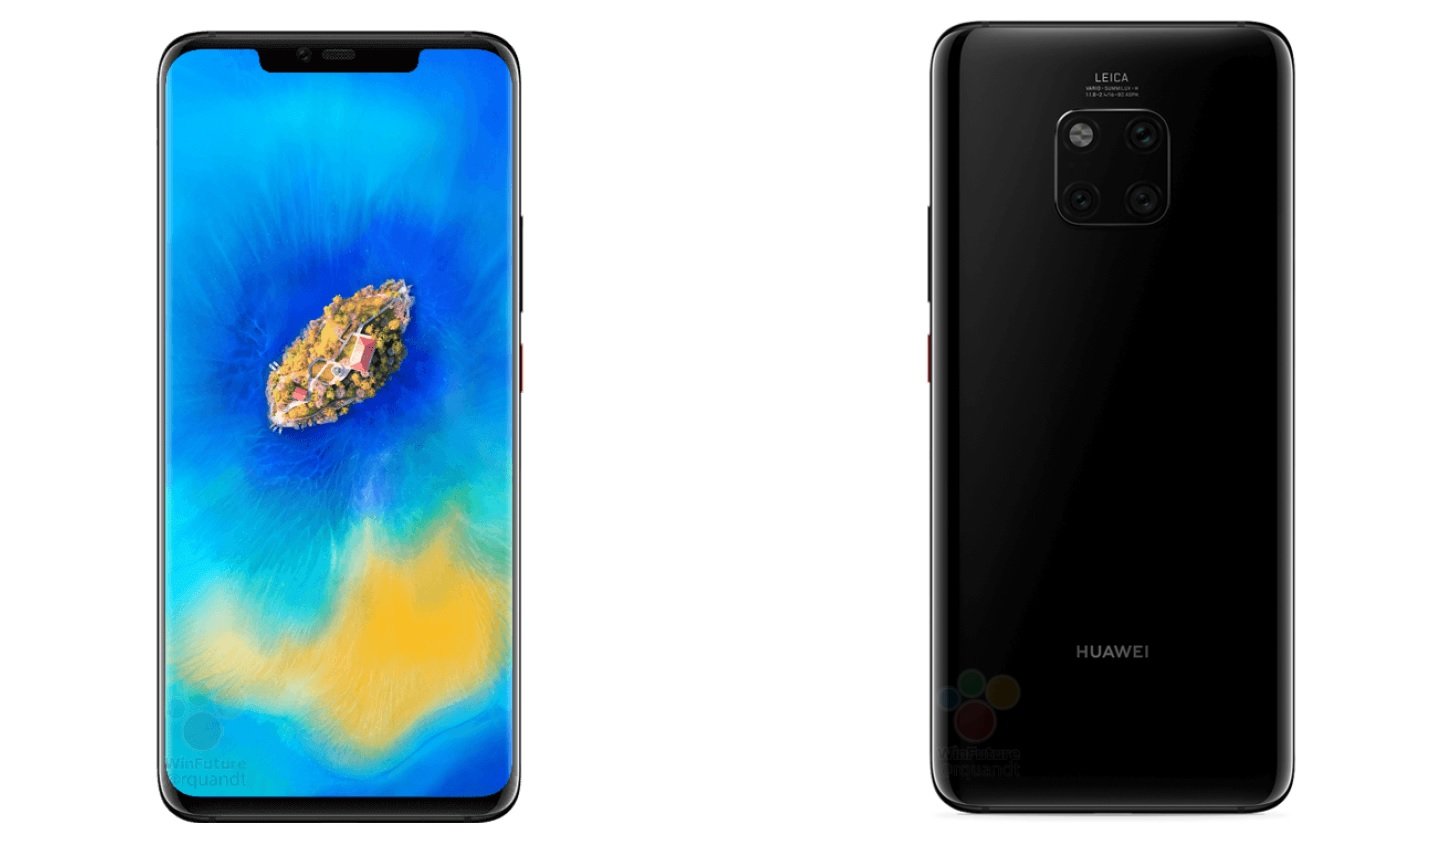 Leaked Official Renders Reveal Huawei Mate 20 Pro To Come In Three